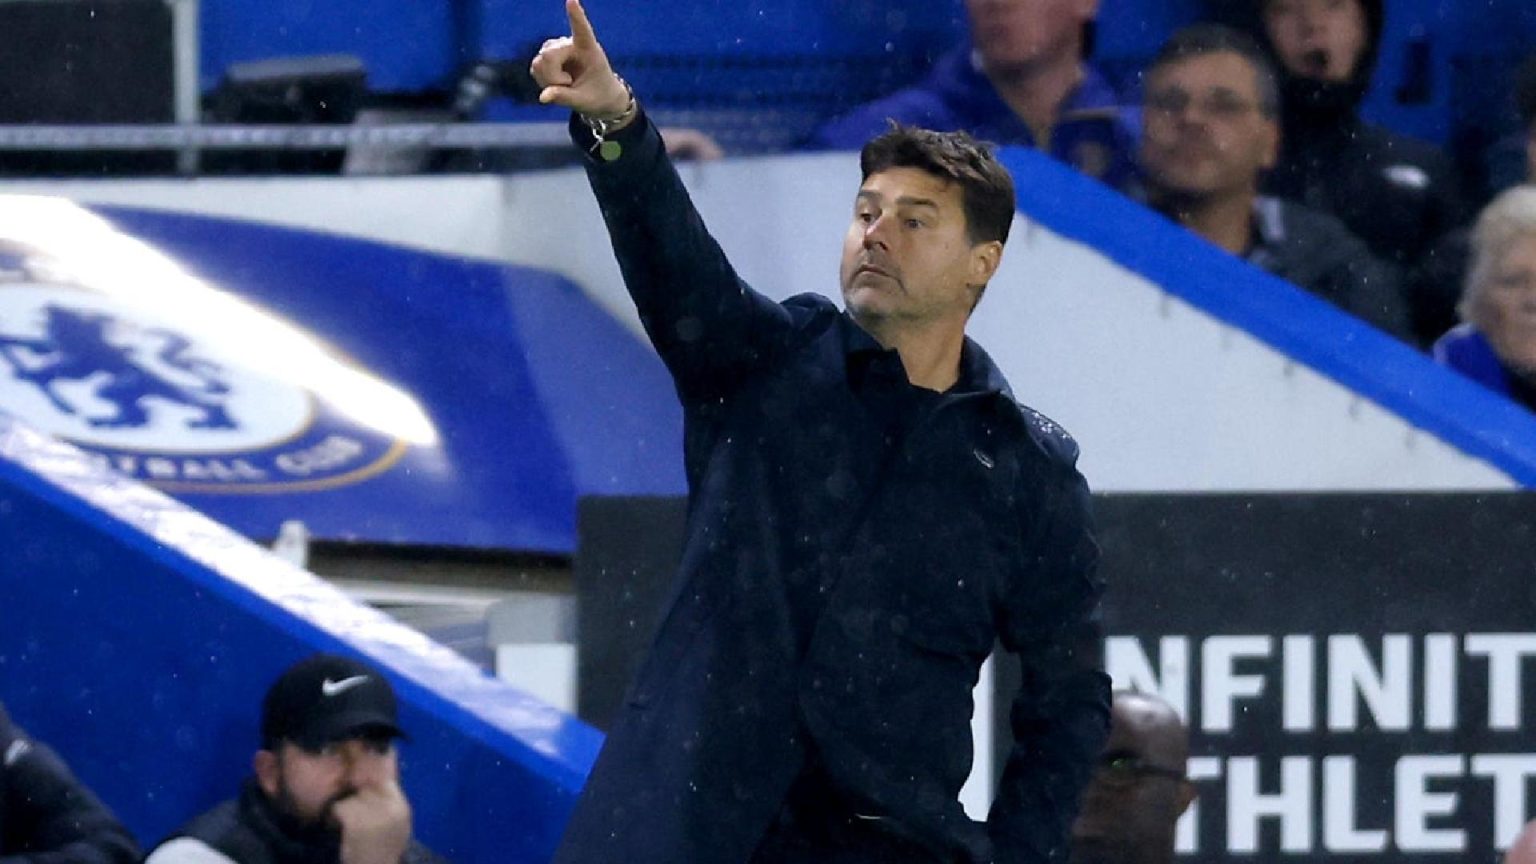 EPL: Pochettino finally reveals why Chelsea concedes too many goals